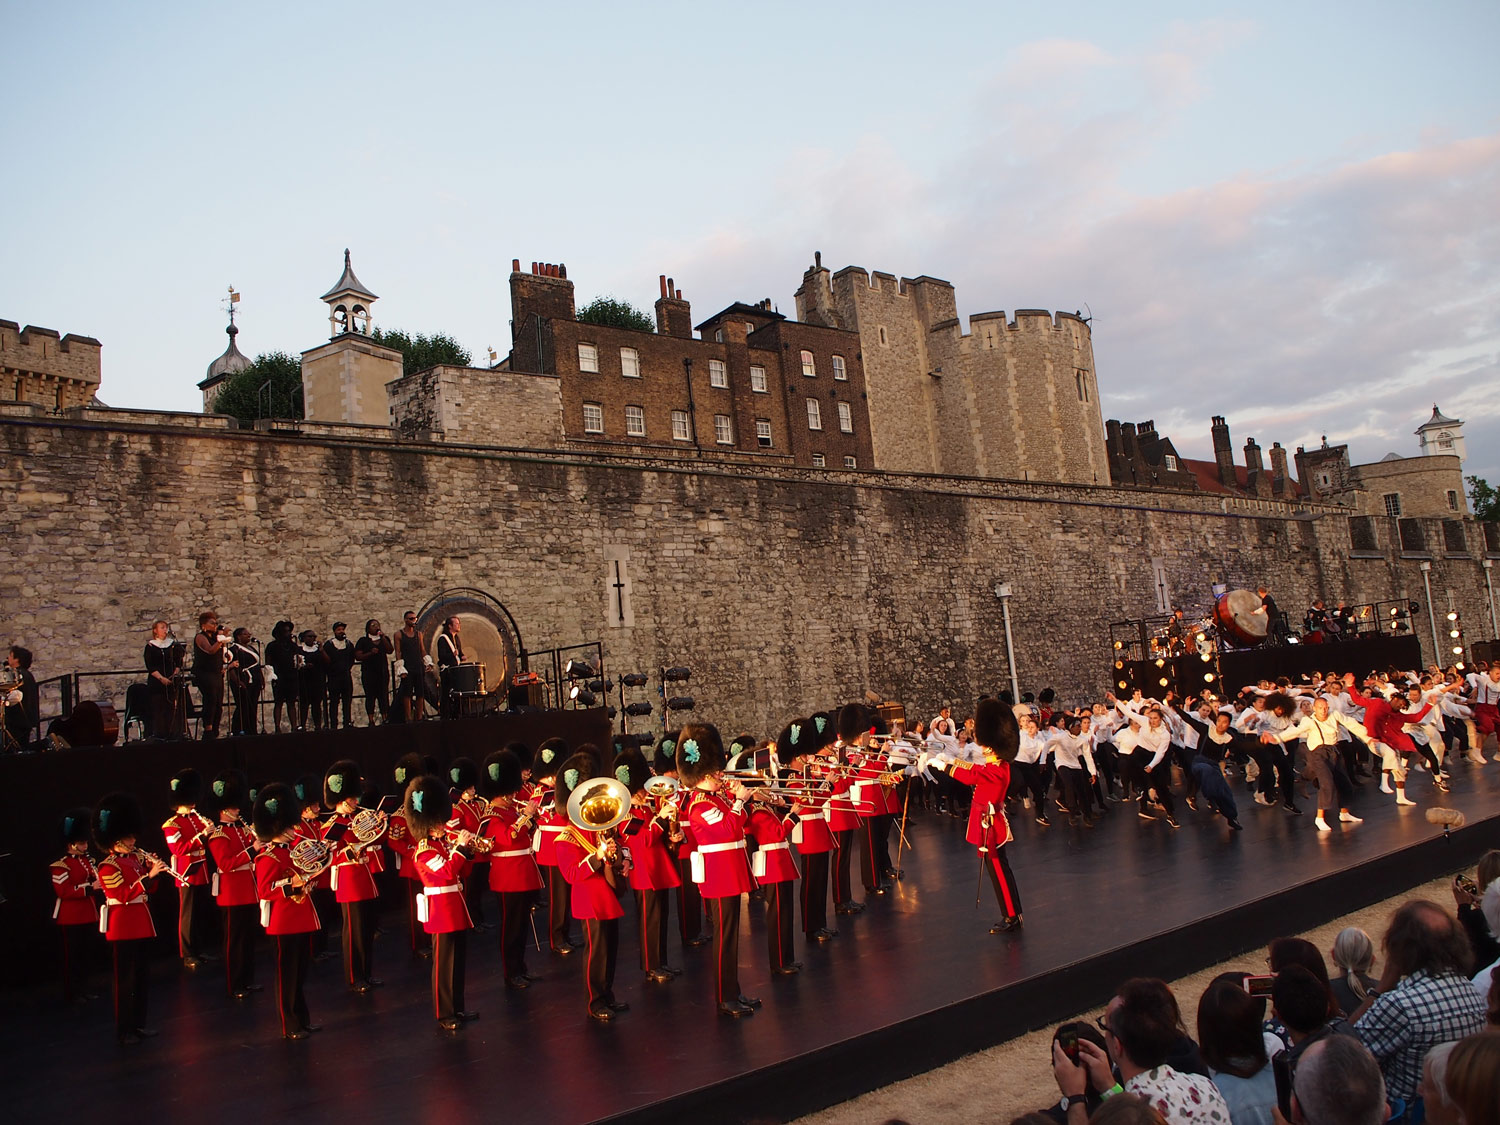 In front of a large castle wall is a black stage. Raised on a platform are a band, all dressed in black. On the stage, a military brass marching band are dress in red with black bearskin hats. Also on the stage are dozens of young people, dancing.